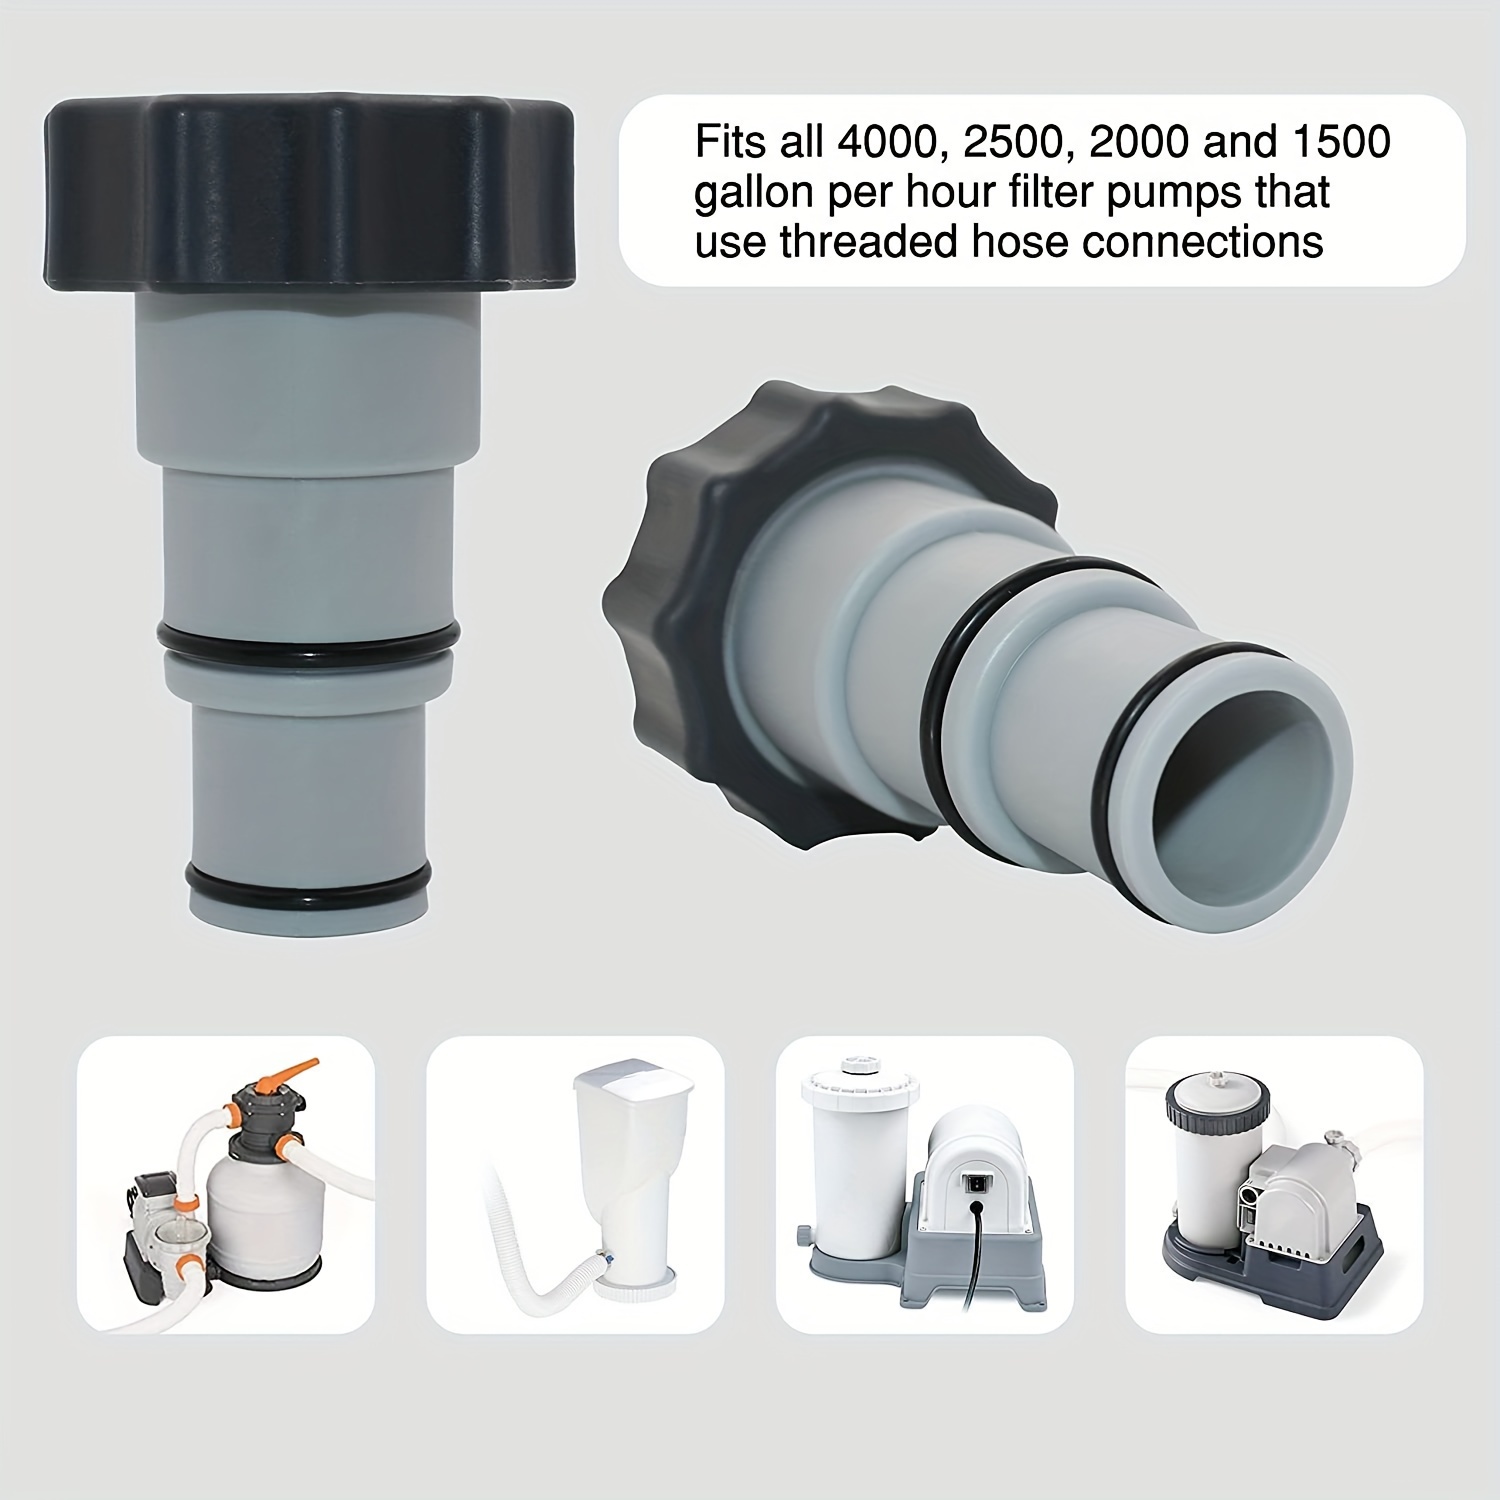 

Pool Pump Adapter - Fits 4000, 2500, 2000 & 1500 Gph Filters - Converts 1.25" To 1.5" Hose For Easy Installation